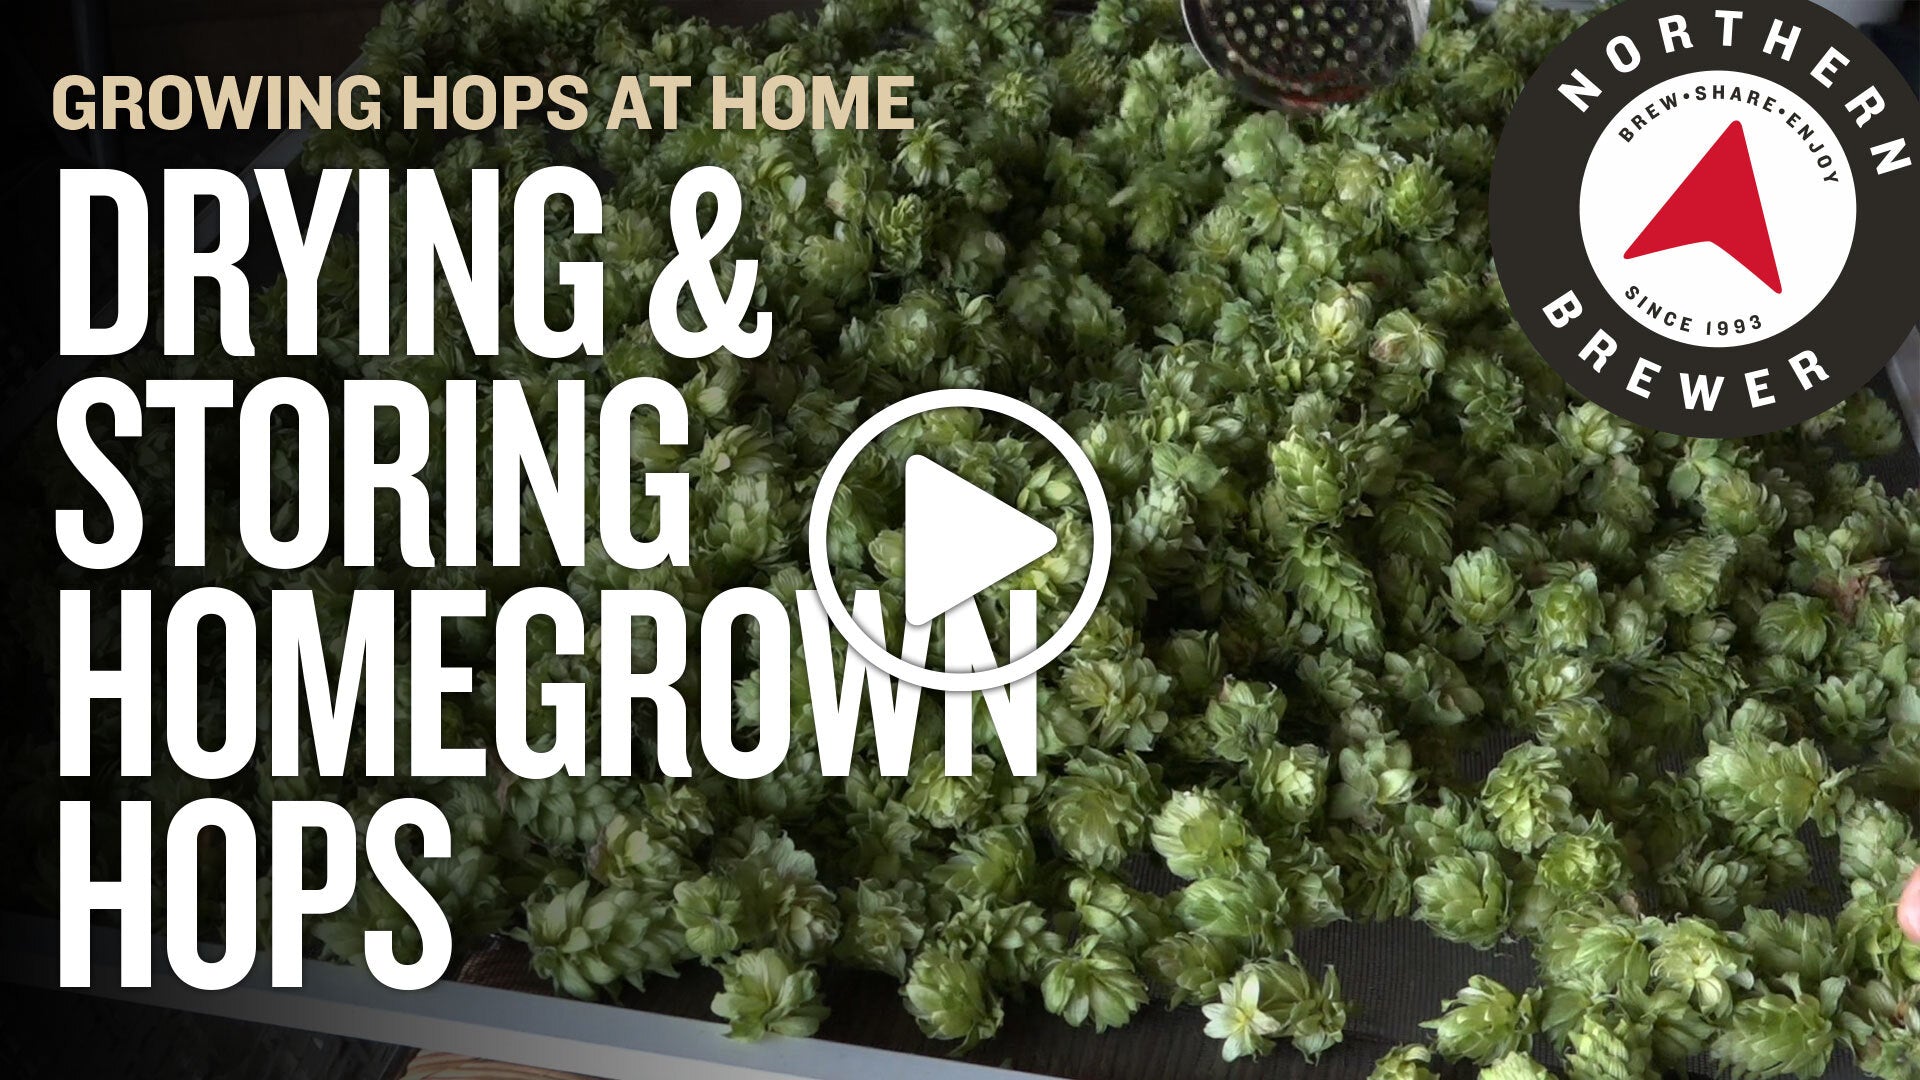 Drying and Storing Homegrown Hops